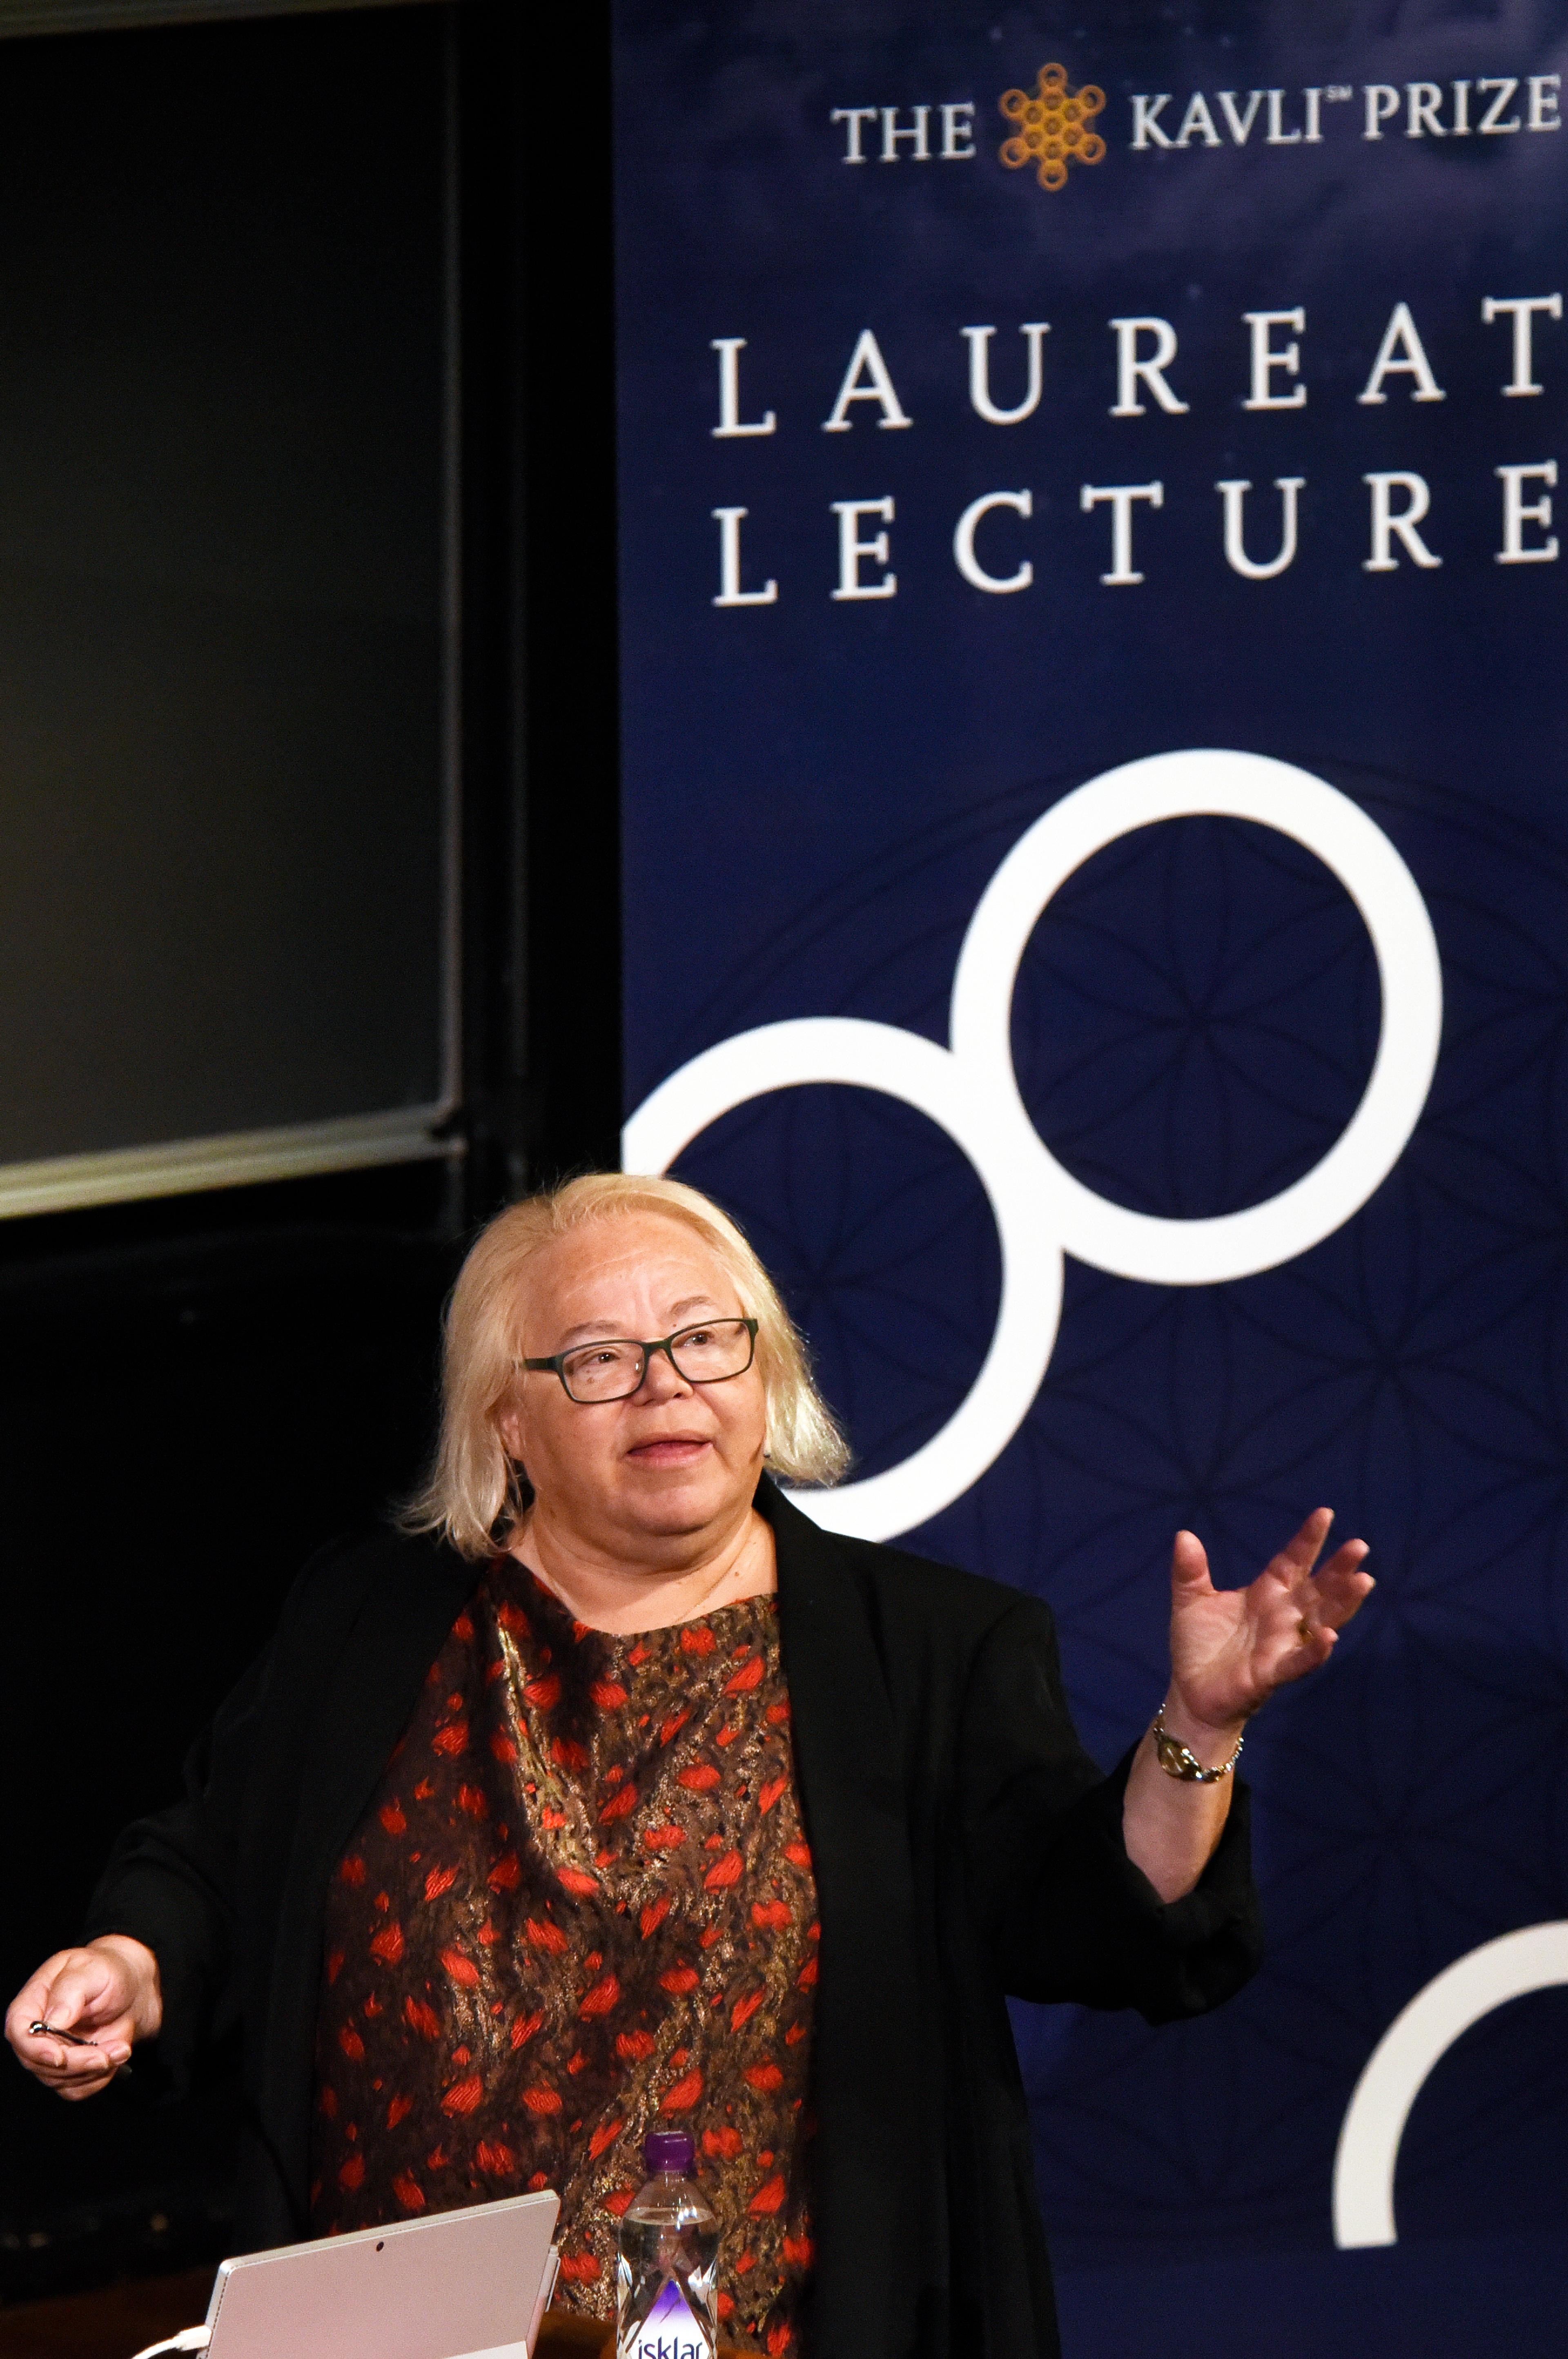 Eve Marder giving a lecture during the 2016 Kavli Prize week in Oslo